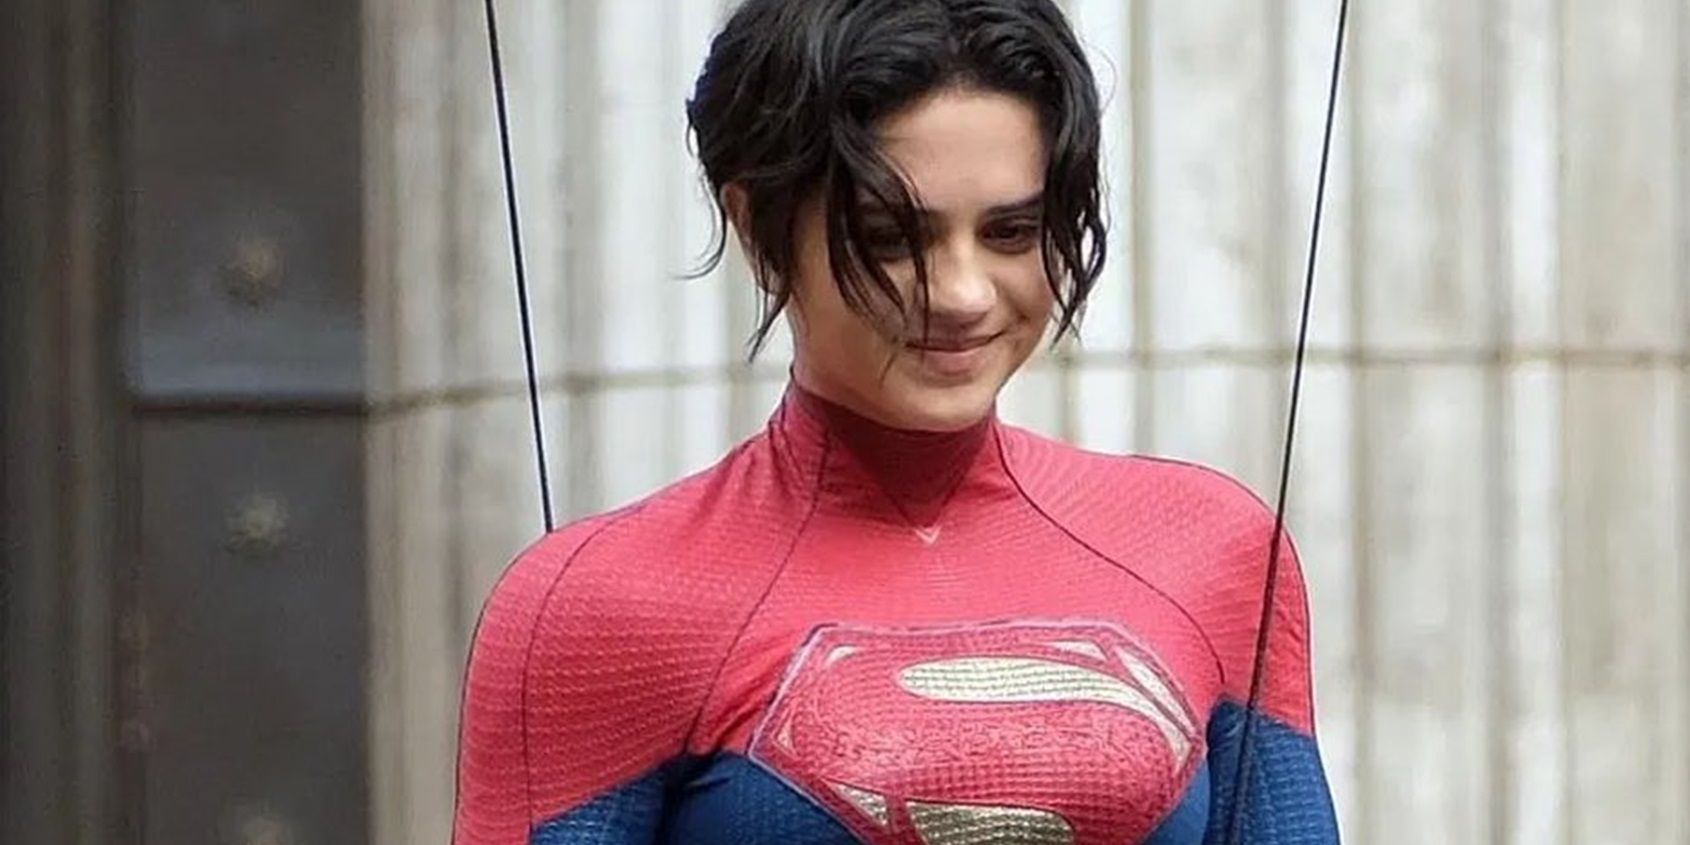 Sasha Calle as Supergirl on the set of The Flash